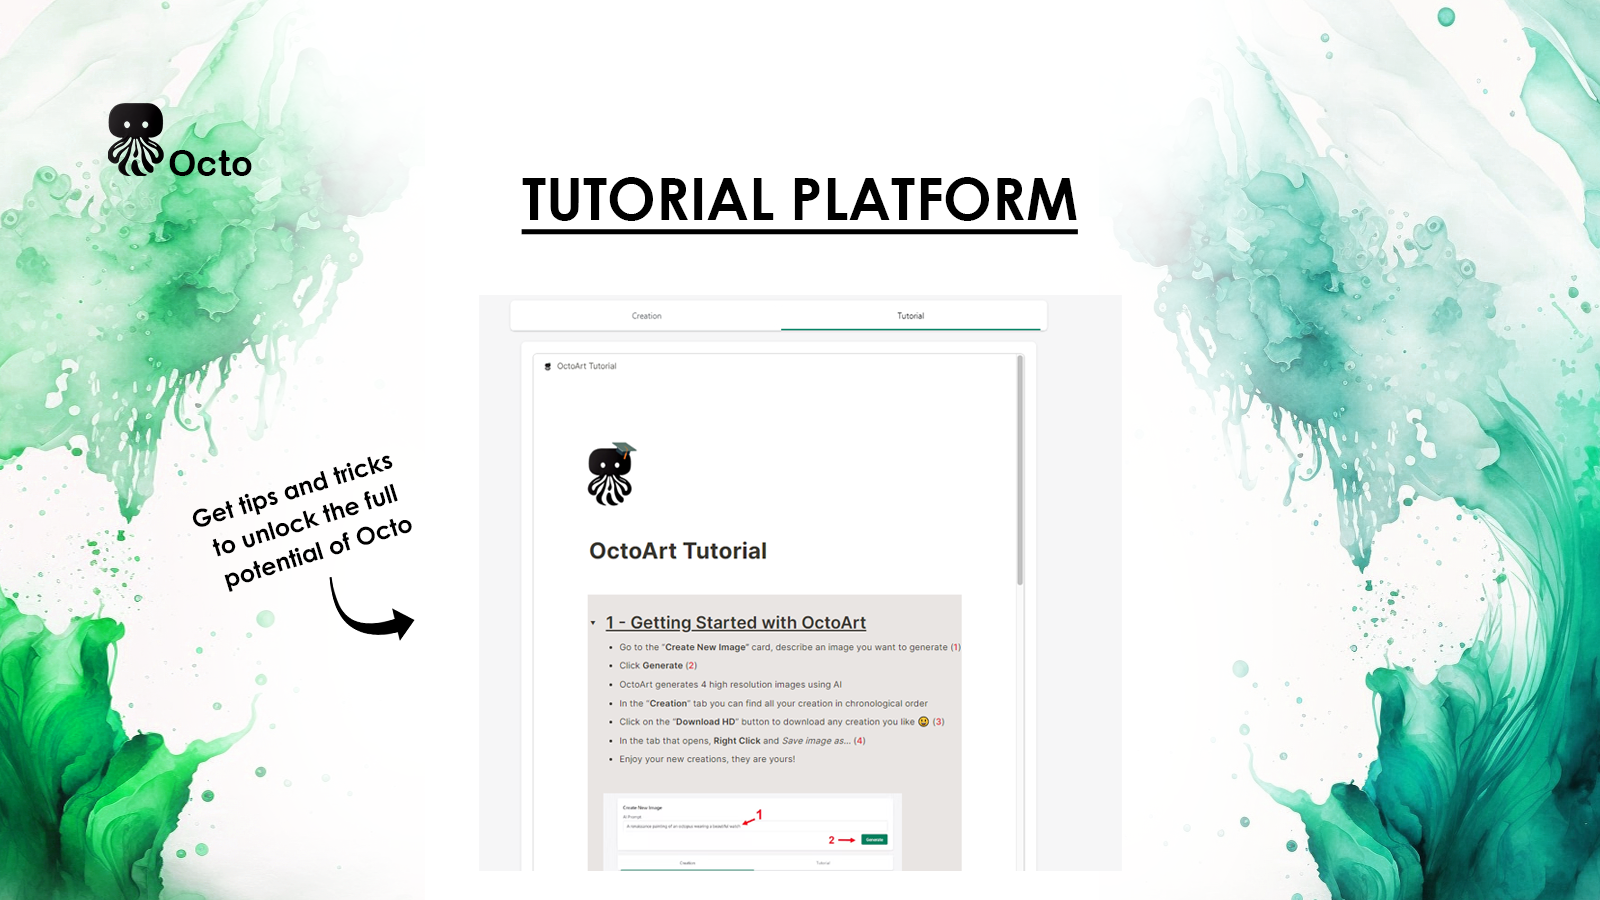 Get tips and tricks with Octo's Tutorial Plateform